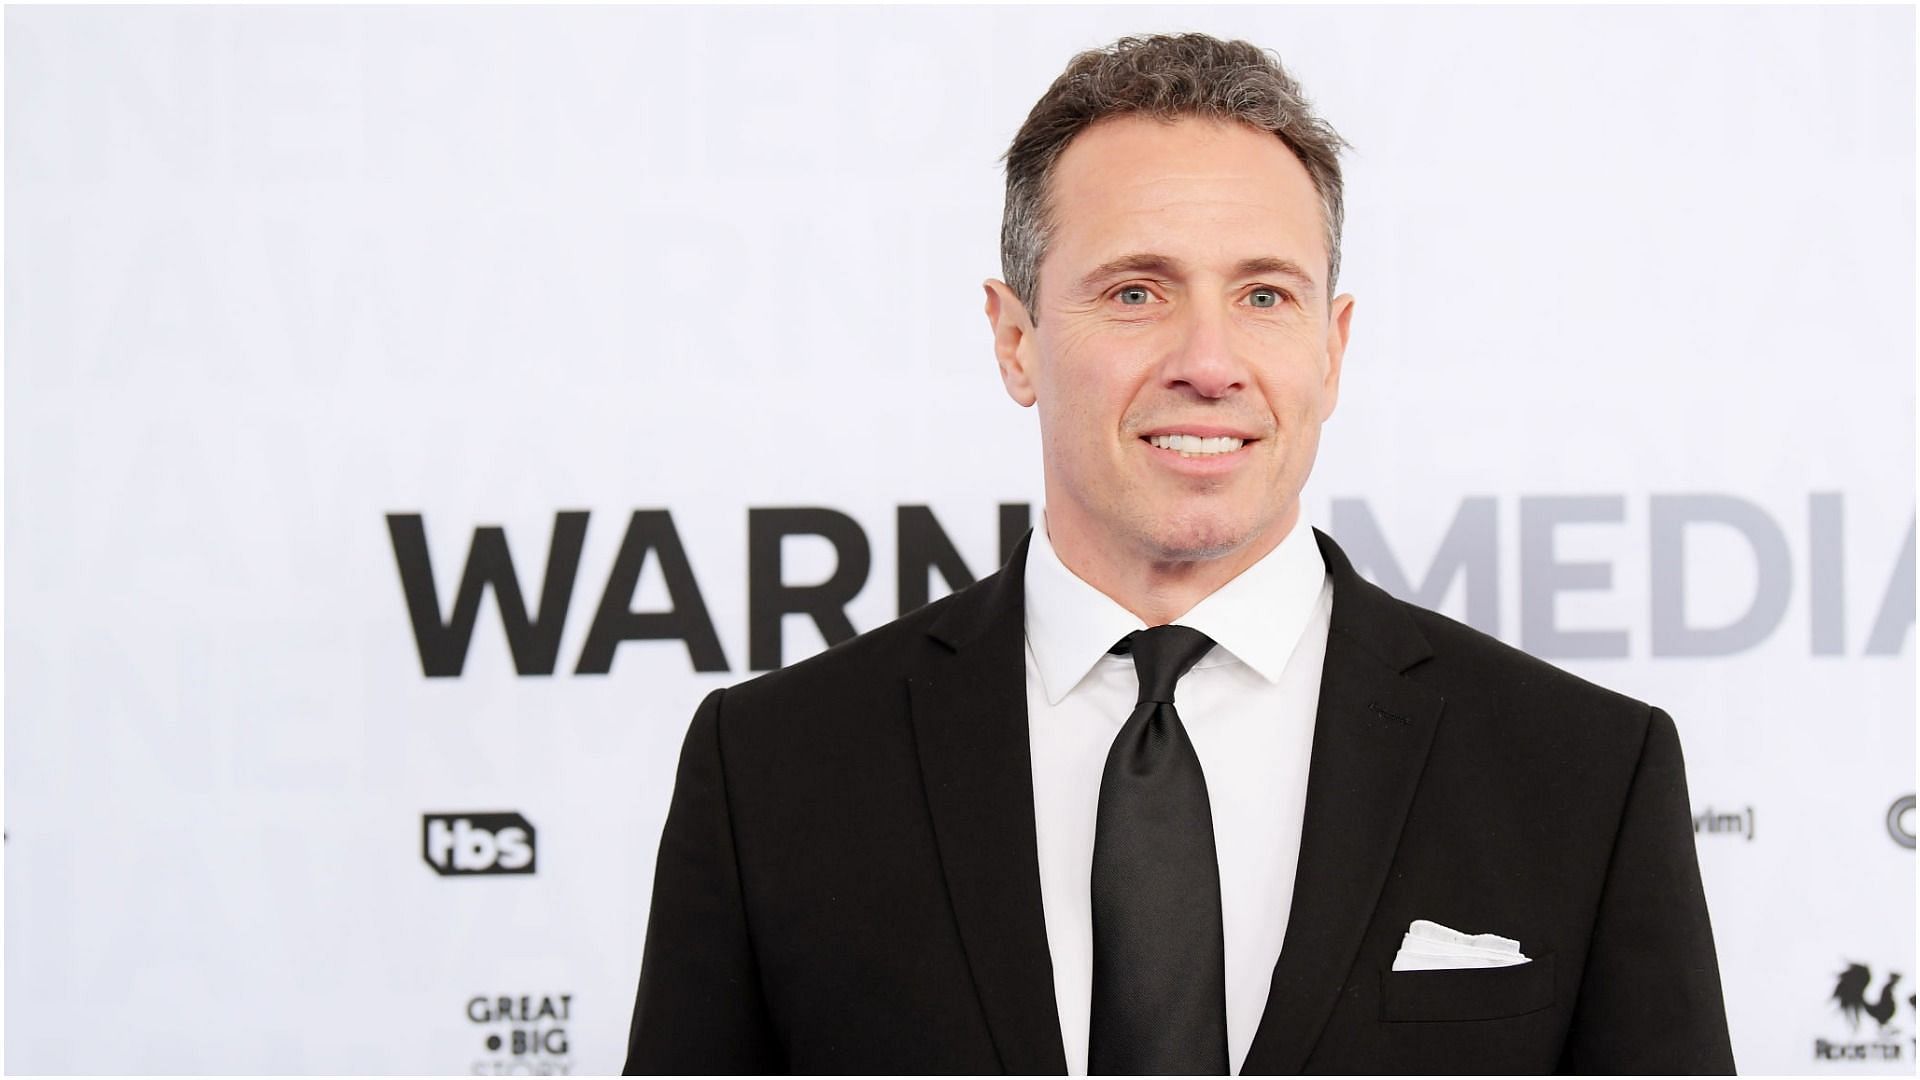 Chris Cuomo attends the WarnerMedia Upfront 2019 (Image by Dimitrios Kambouris via Getty Images)